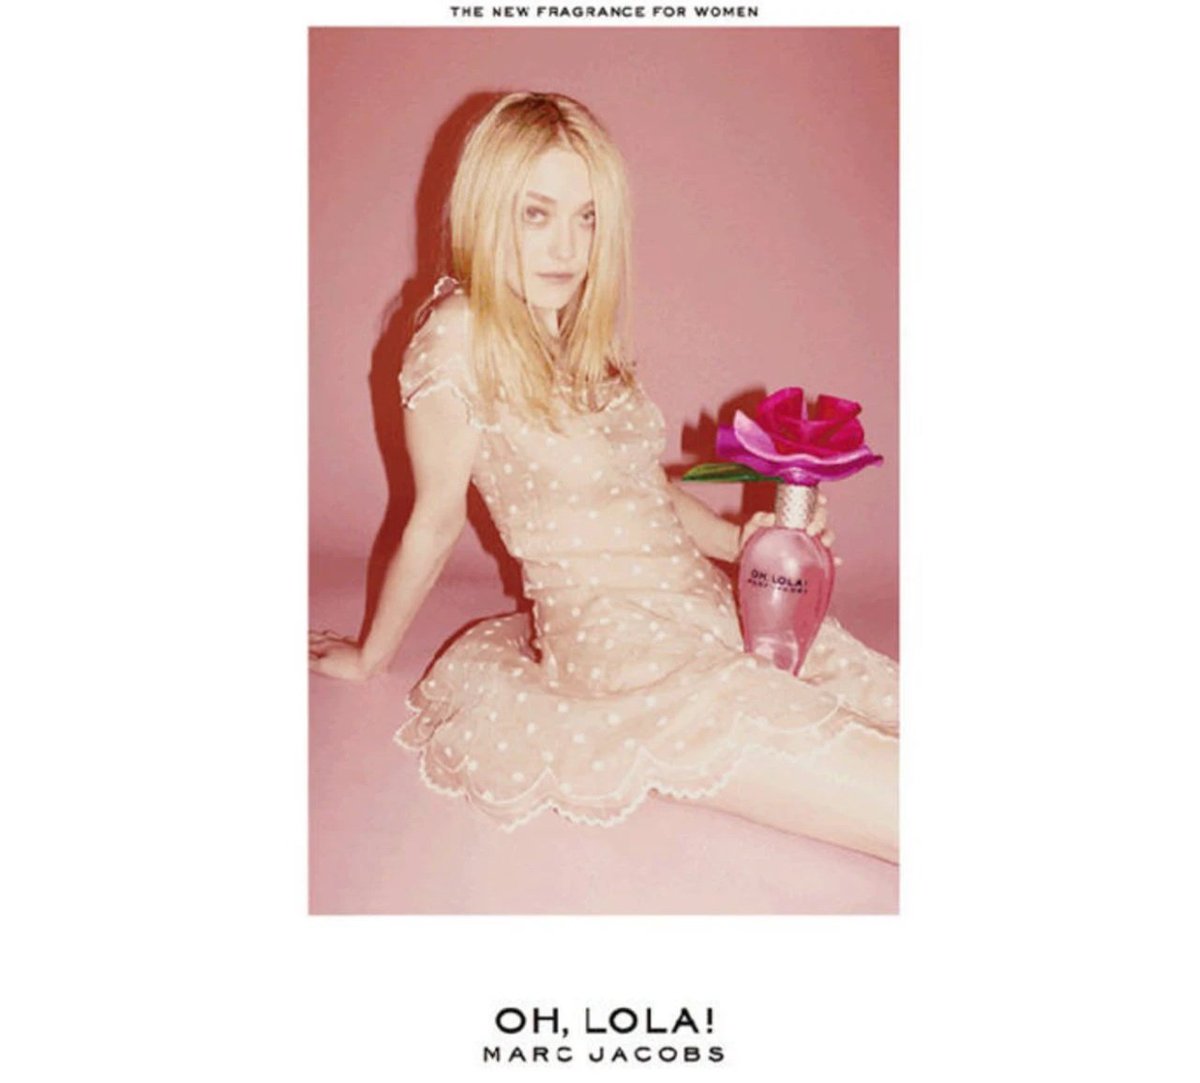 Marc Jacobs 'Lola', 2011. Banned in England for being sexually provocative. Dakota Fanning was 17 years old